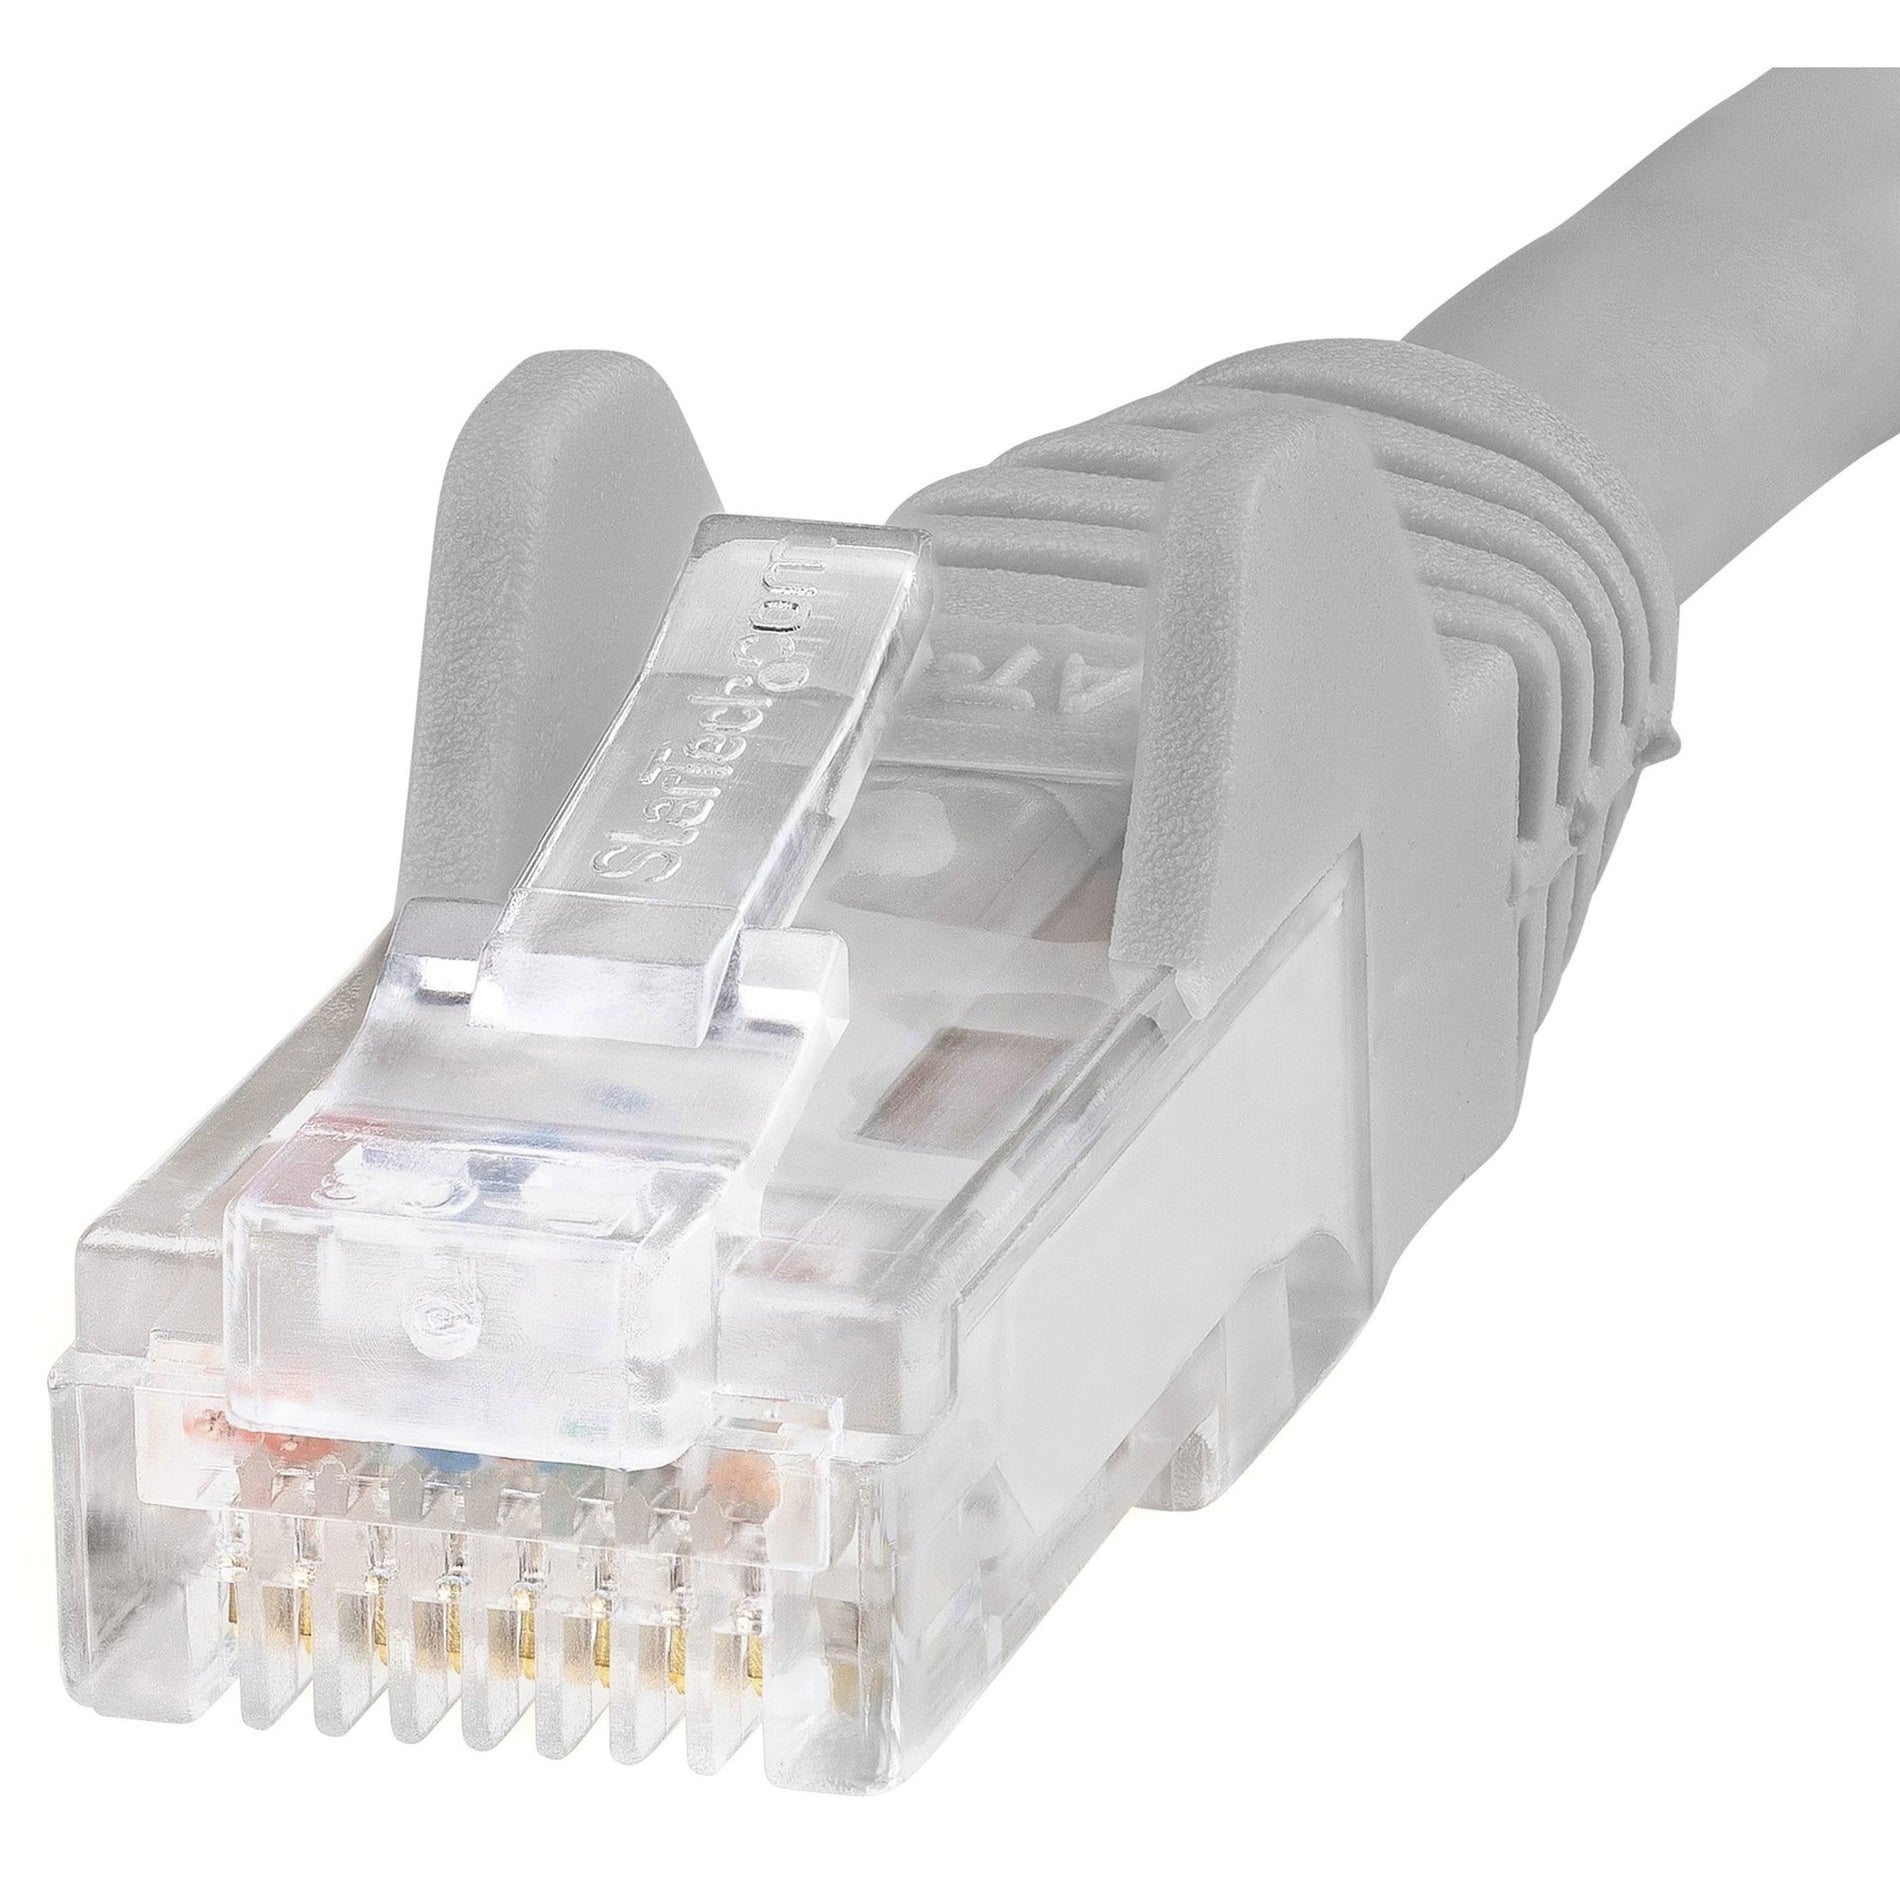 StarTech.com N6PATCH2GR Cat6 Network Cable, 2ft Gray Ethernet Cable, Snagless RJ45 Connectors